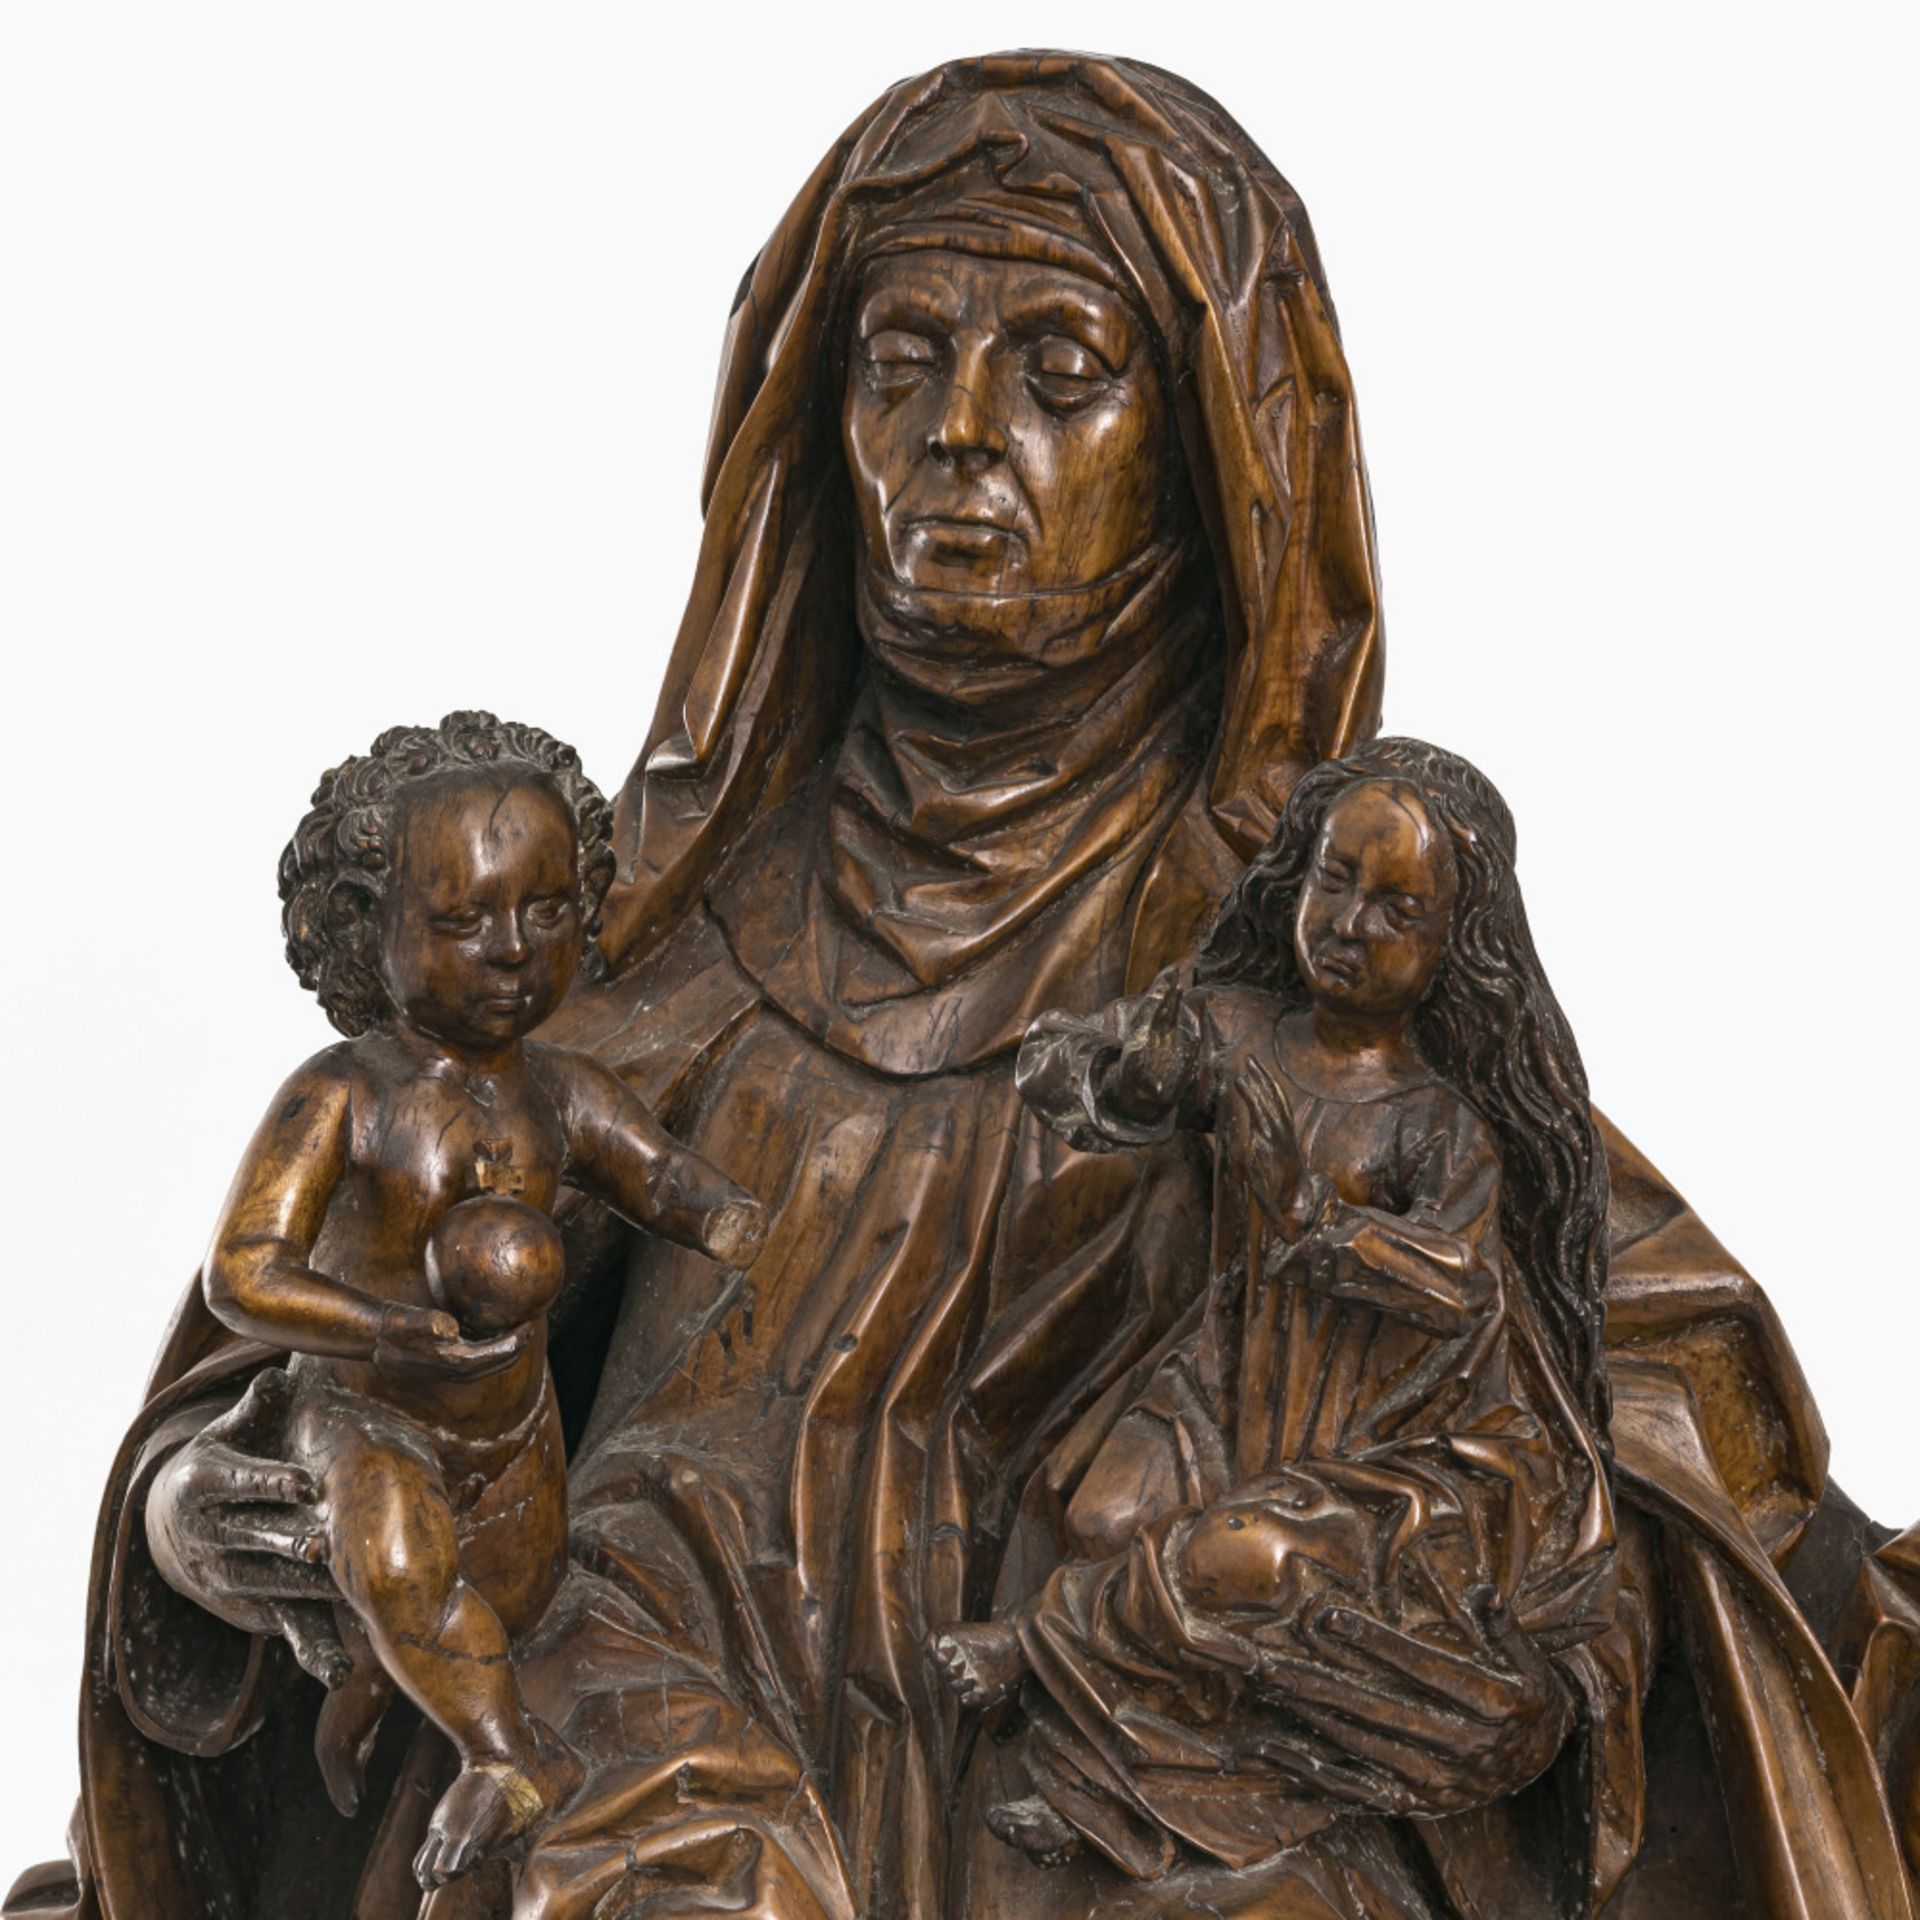 Virgin and Child with Saint Anne - Central Germany/Saxony, circa 1490 - Image 2 of 6